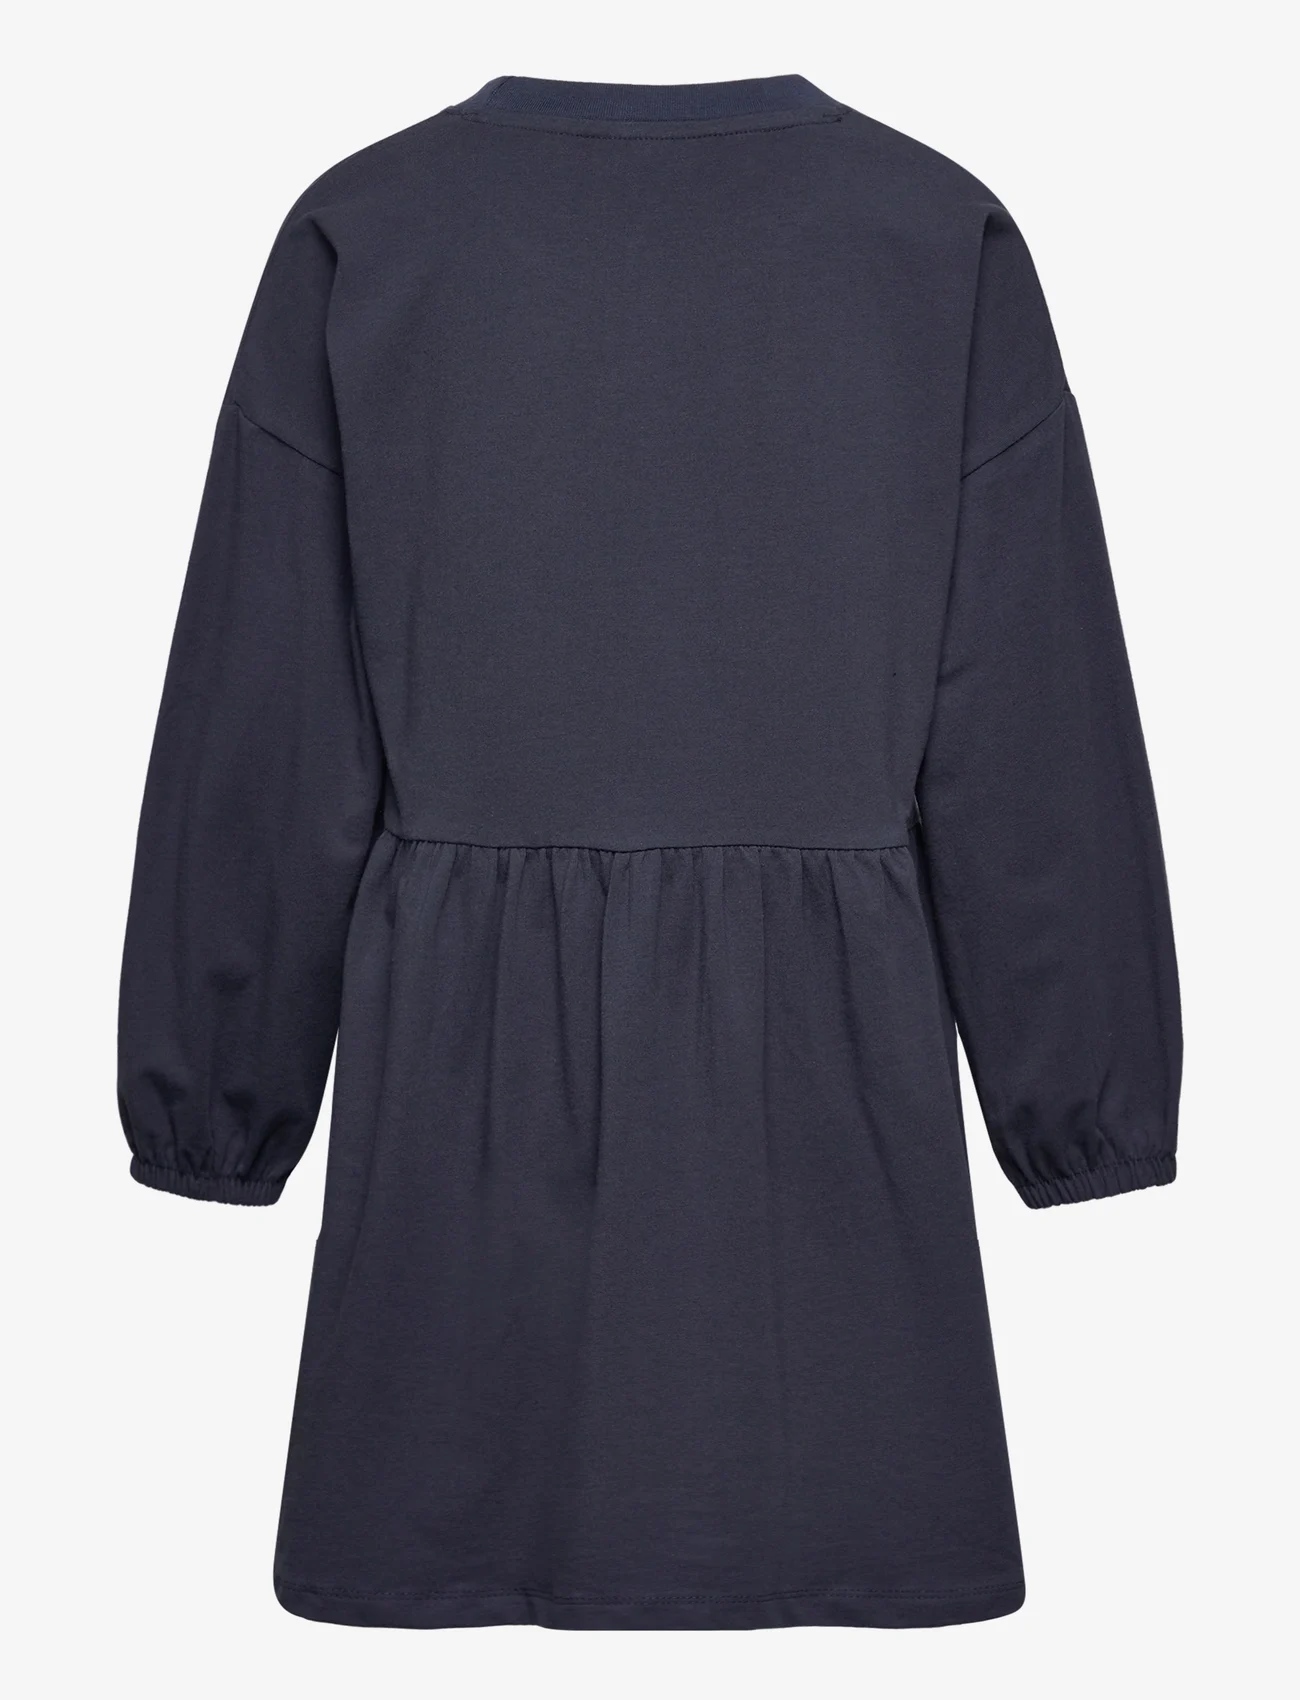 ebbe Kids - Camille Dress - long-sleeved casual dresses - 1136 wild navy - 1